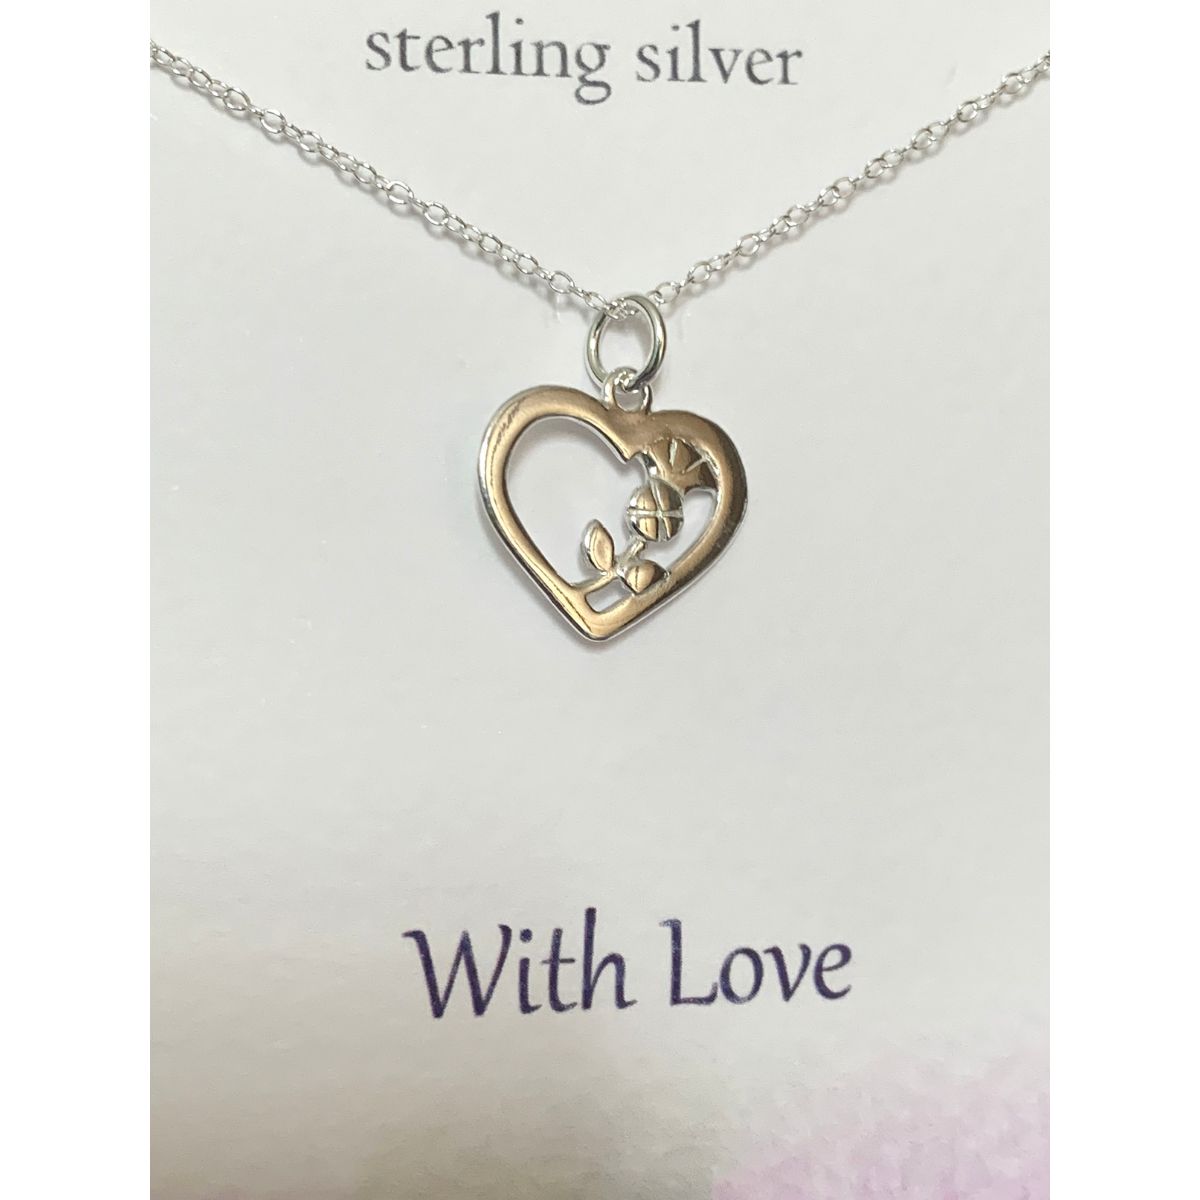 Close up of heart shaped silver pendant with entwined thistle on a silver chain. The presentation card reads Sterling silver With Love